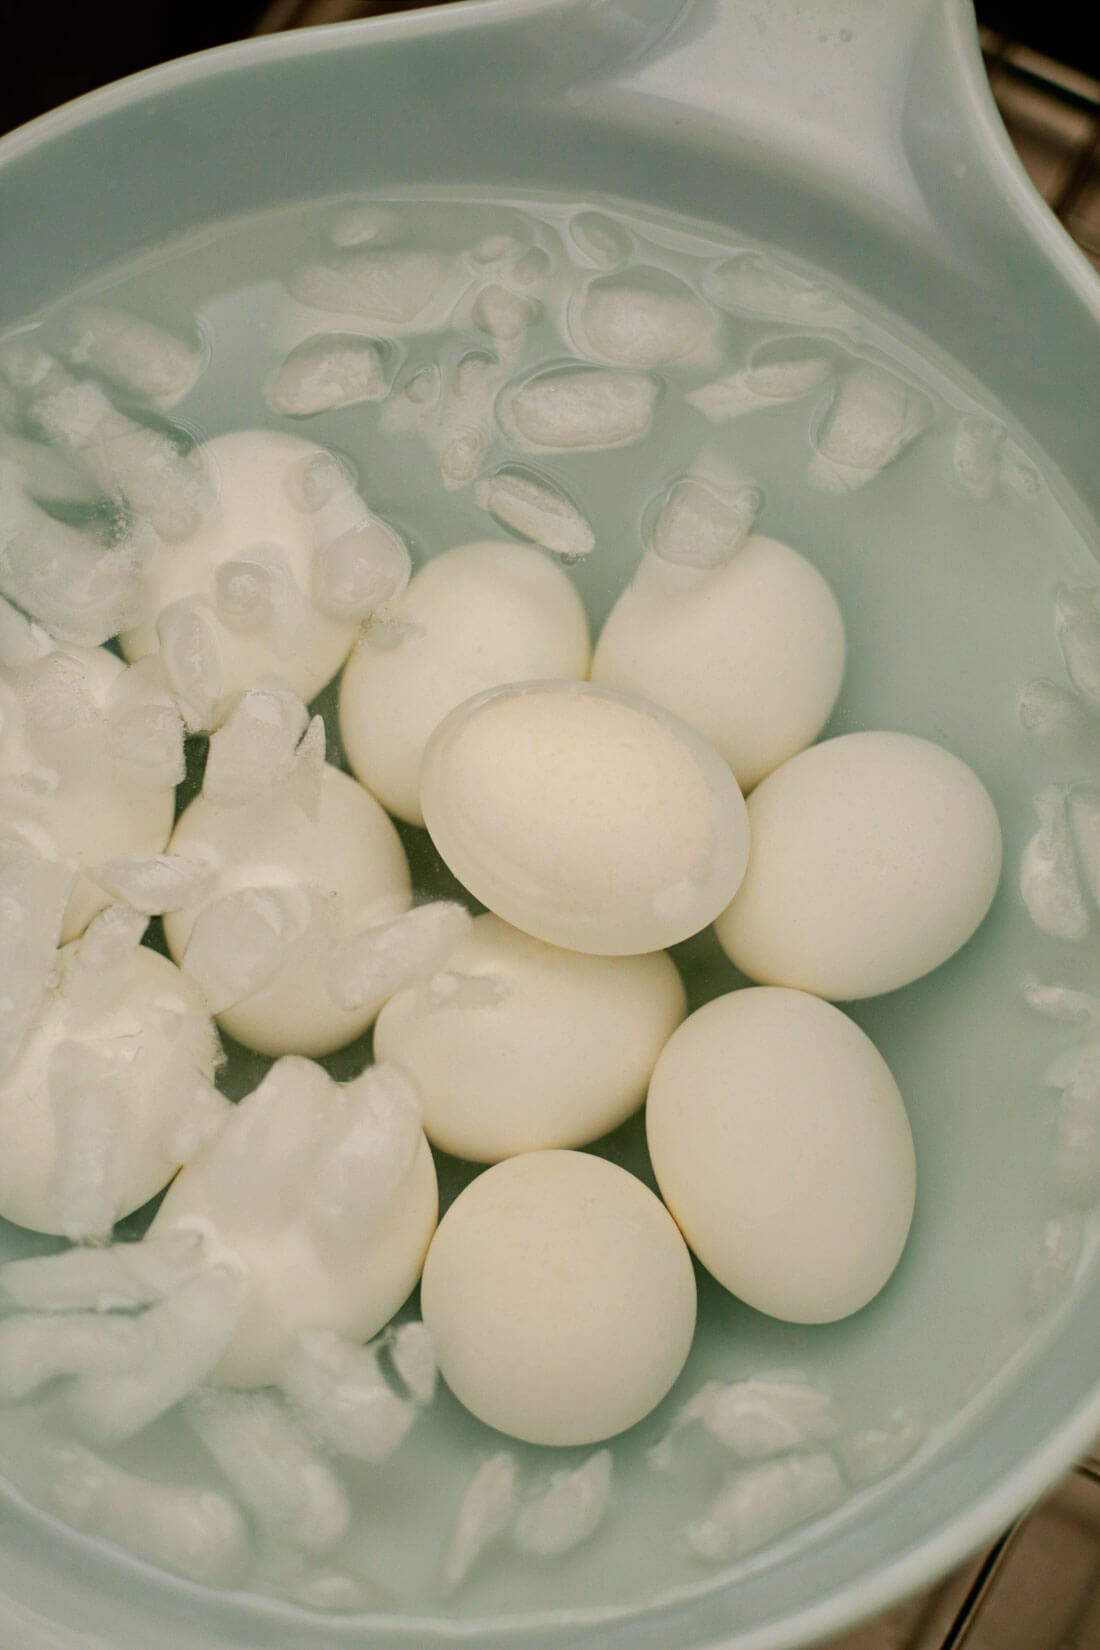 Instant Pot Hard Boiled Eggs in the ice bath